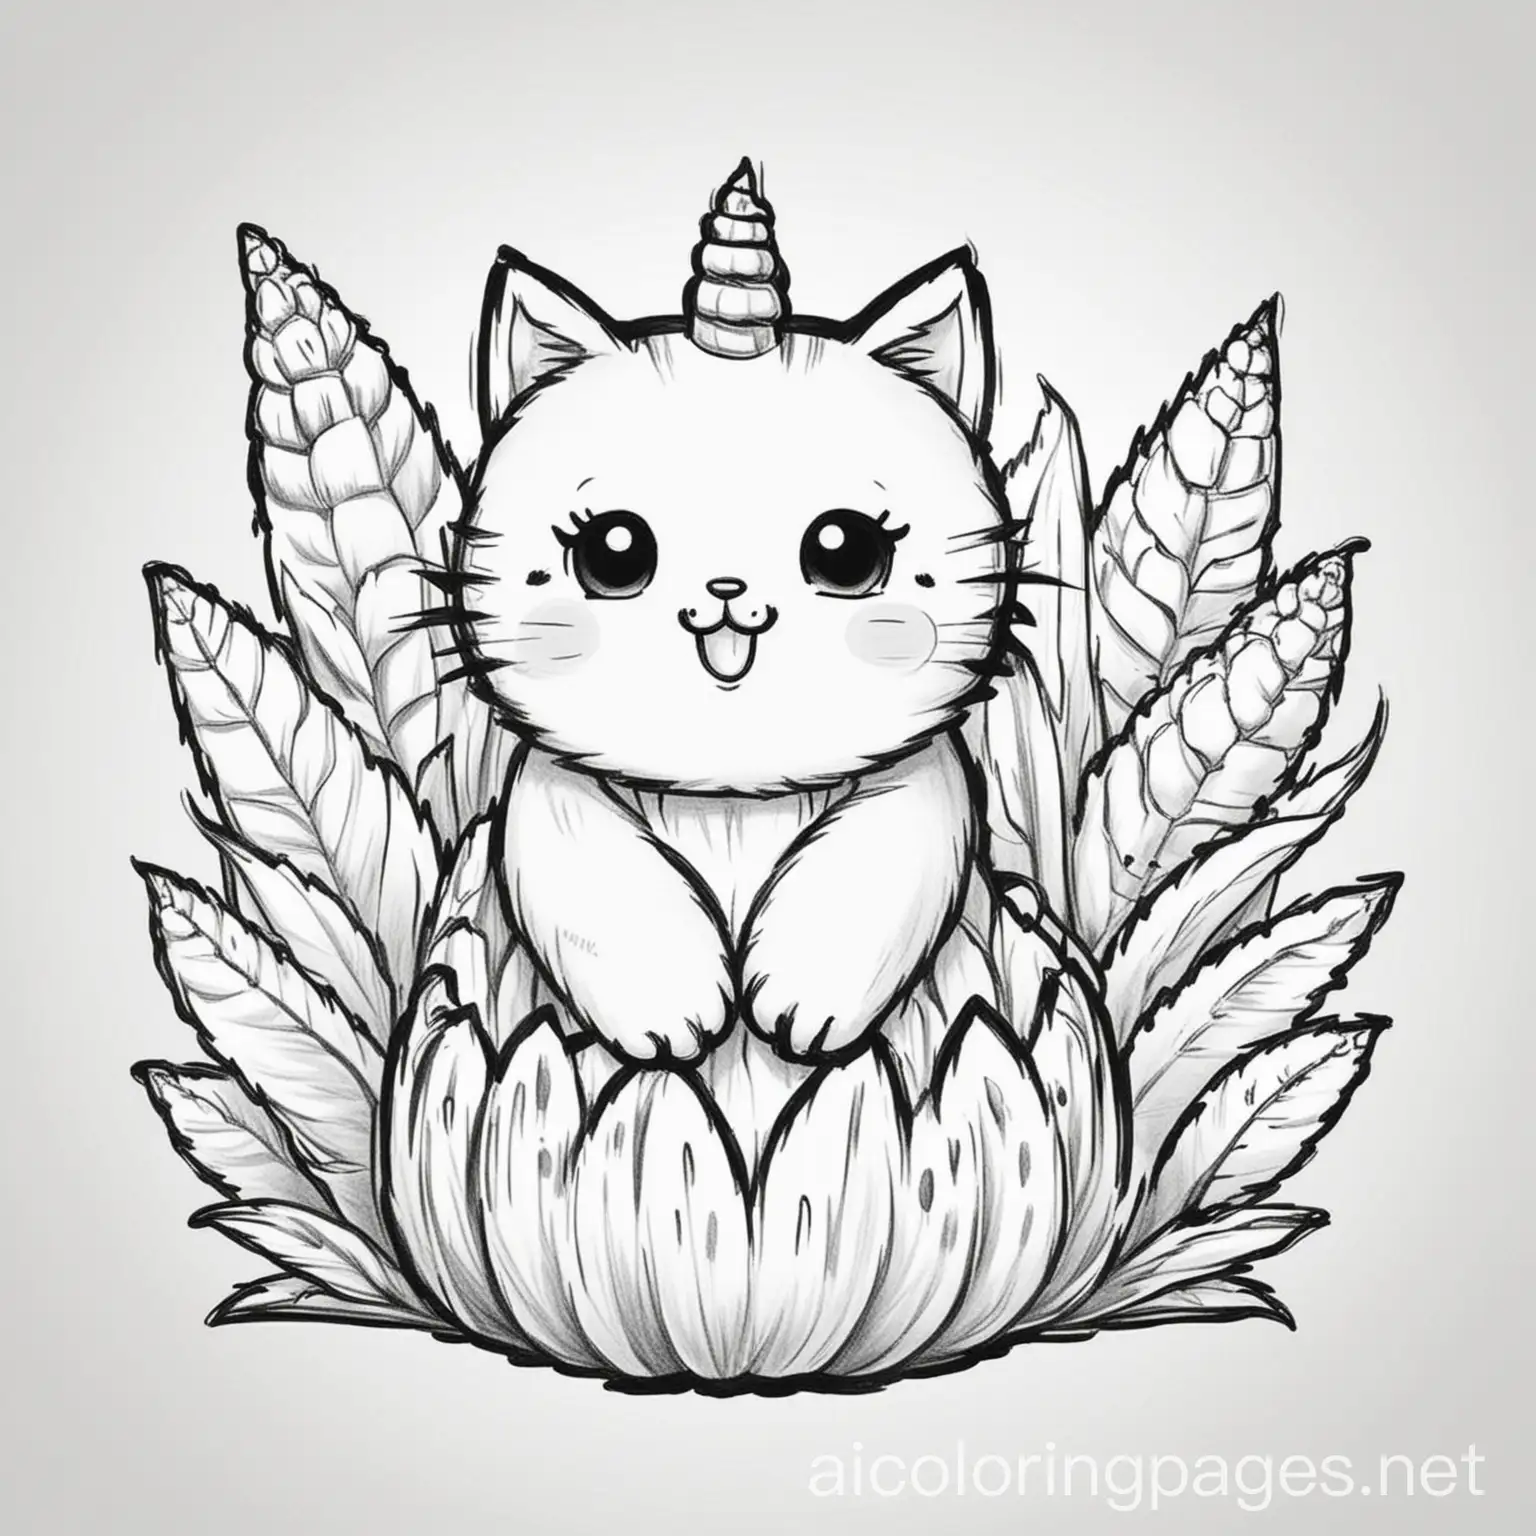 Cute-Kitty-Corn-Coloring-Page-Whimsical-Black-and-White-Line-Art